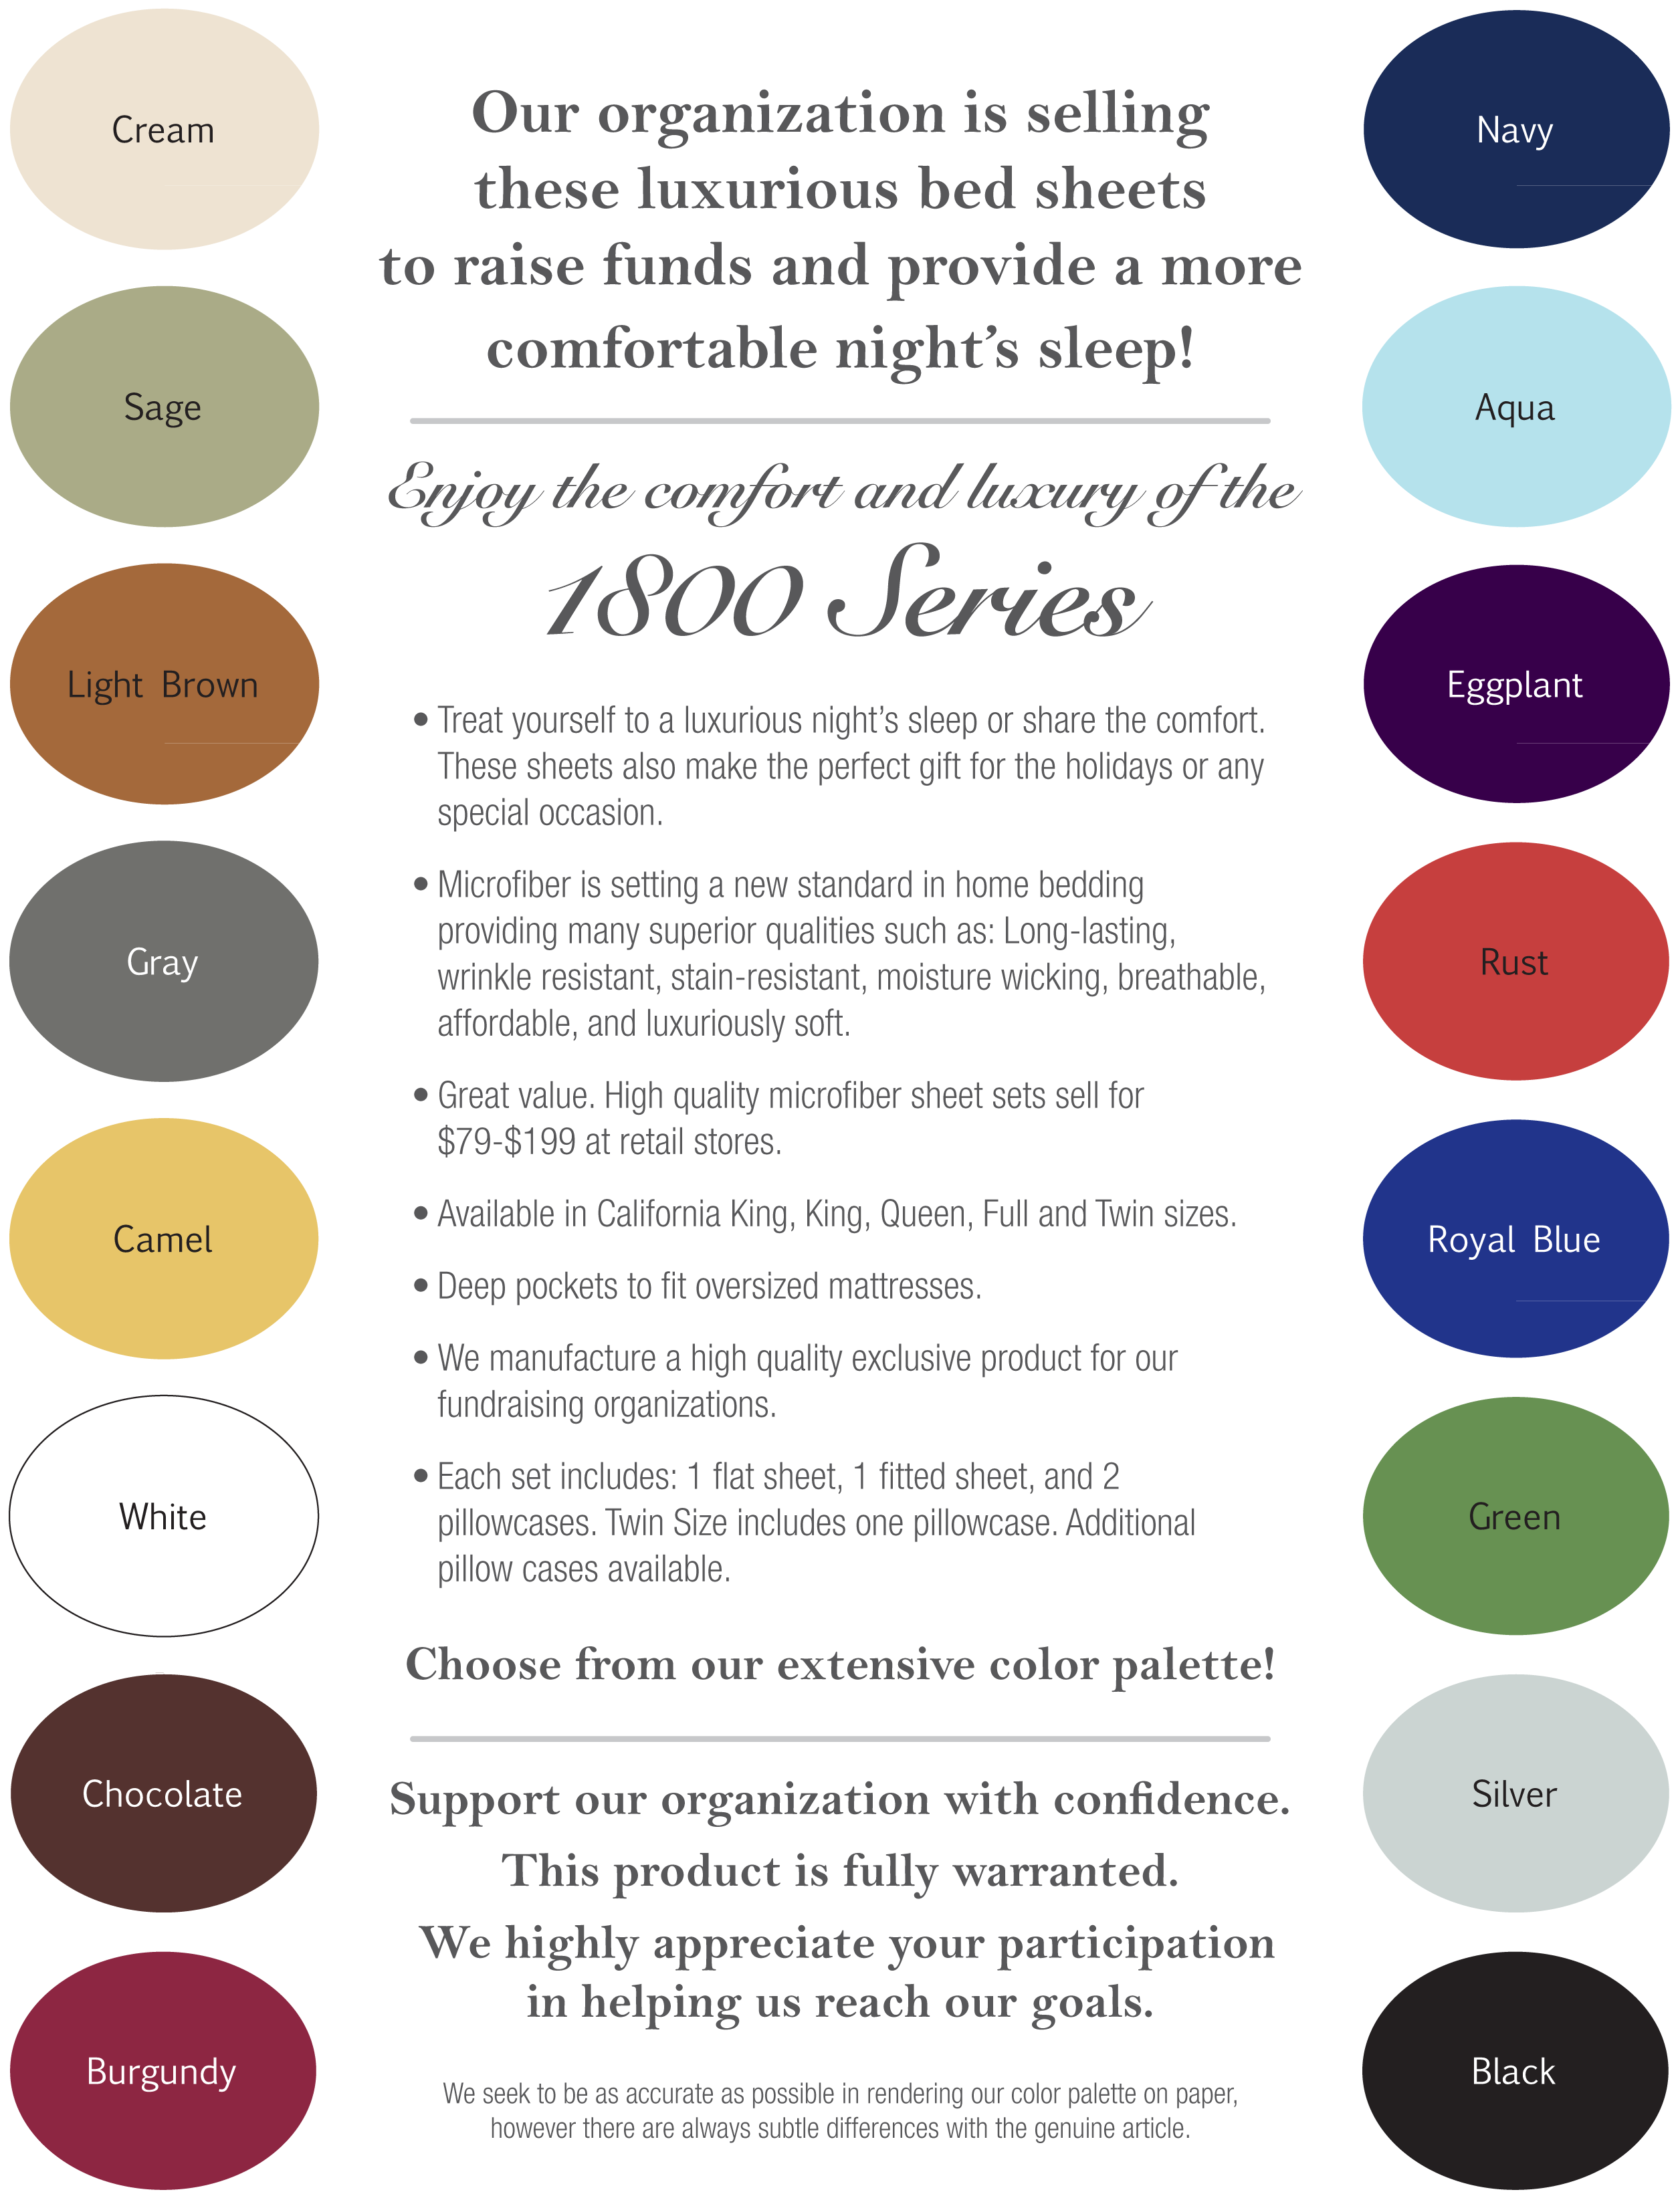 Simply Sheets Fundraising Color Chart